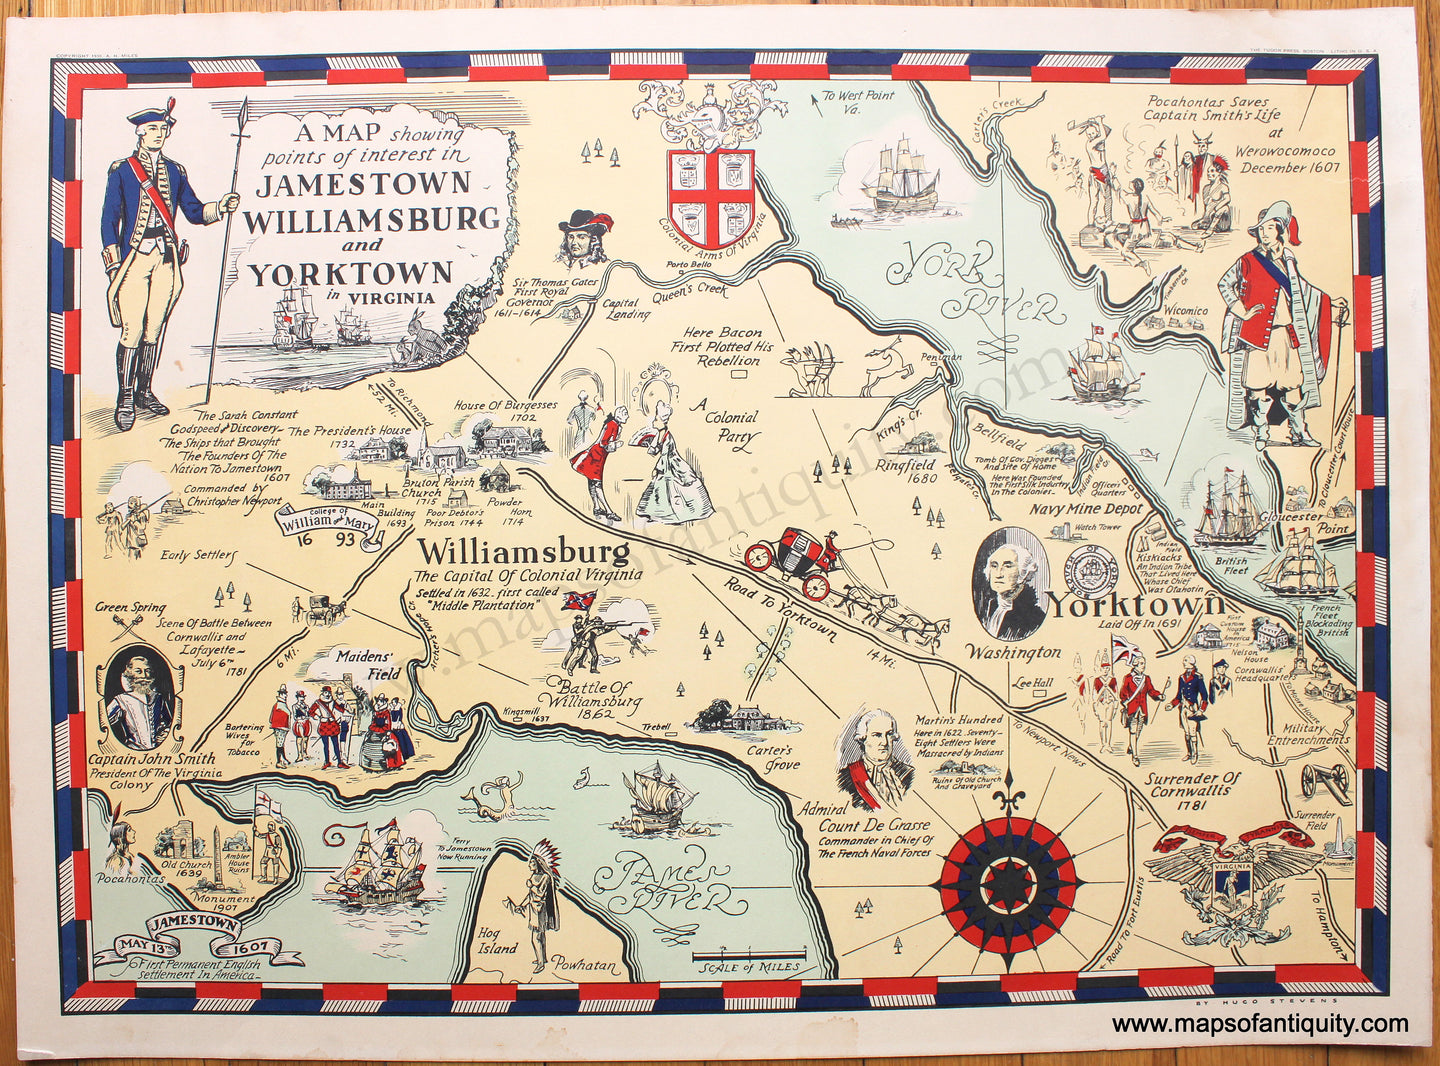 1930 - A Map showing points of interest in Jamestown, Williamsburg and Yorktown in Virginia